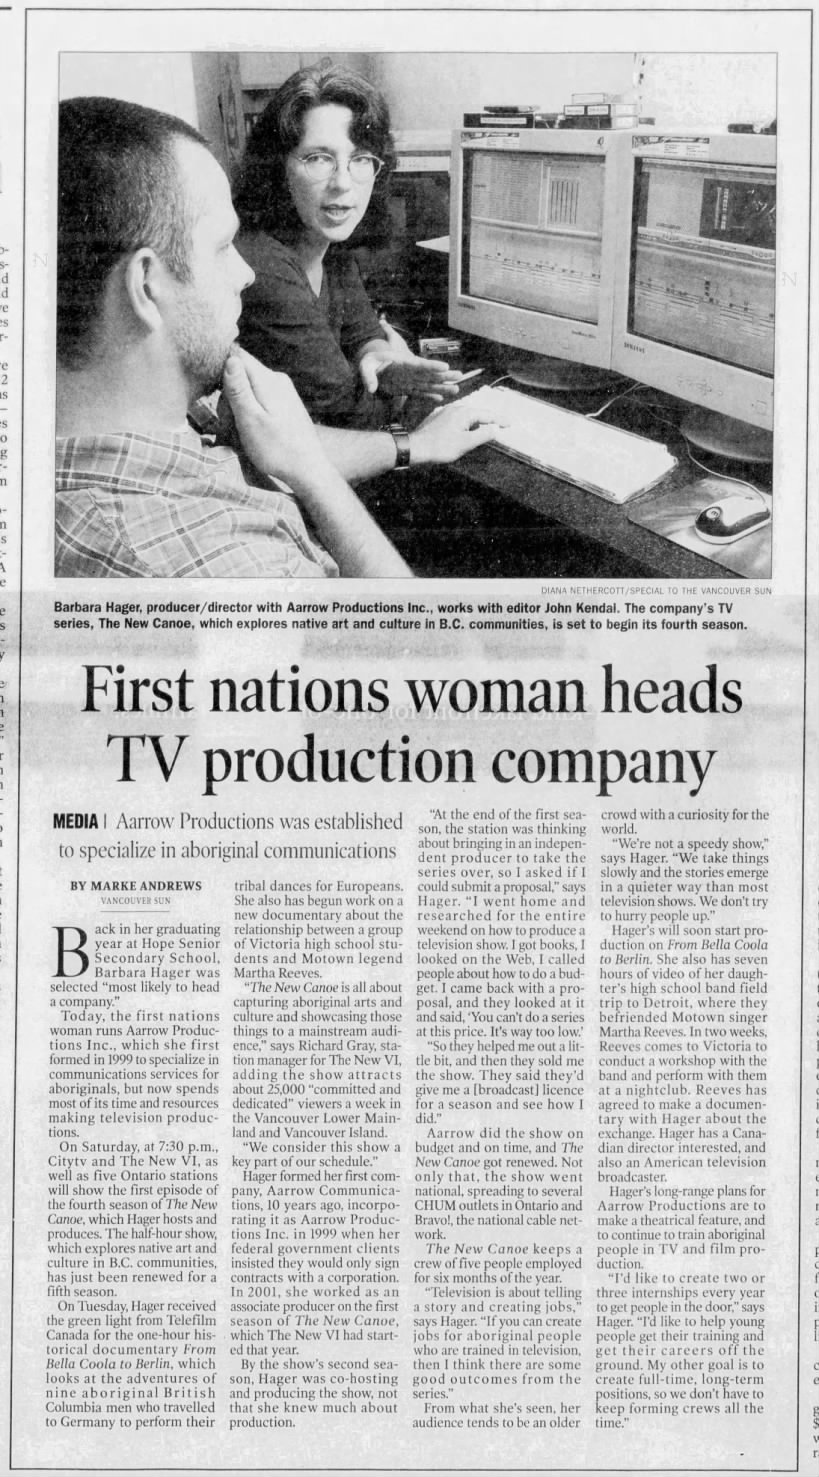 Marke Andrews, "First nations woman heads TV production company." About "The New Canoe."